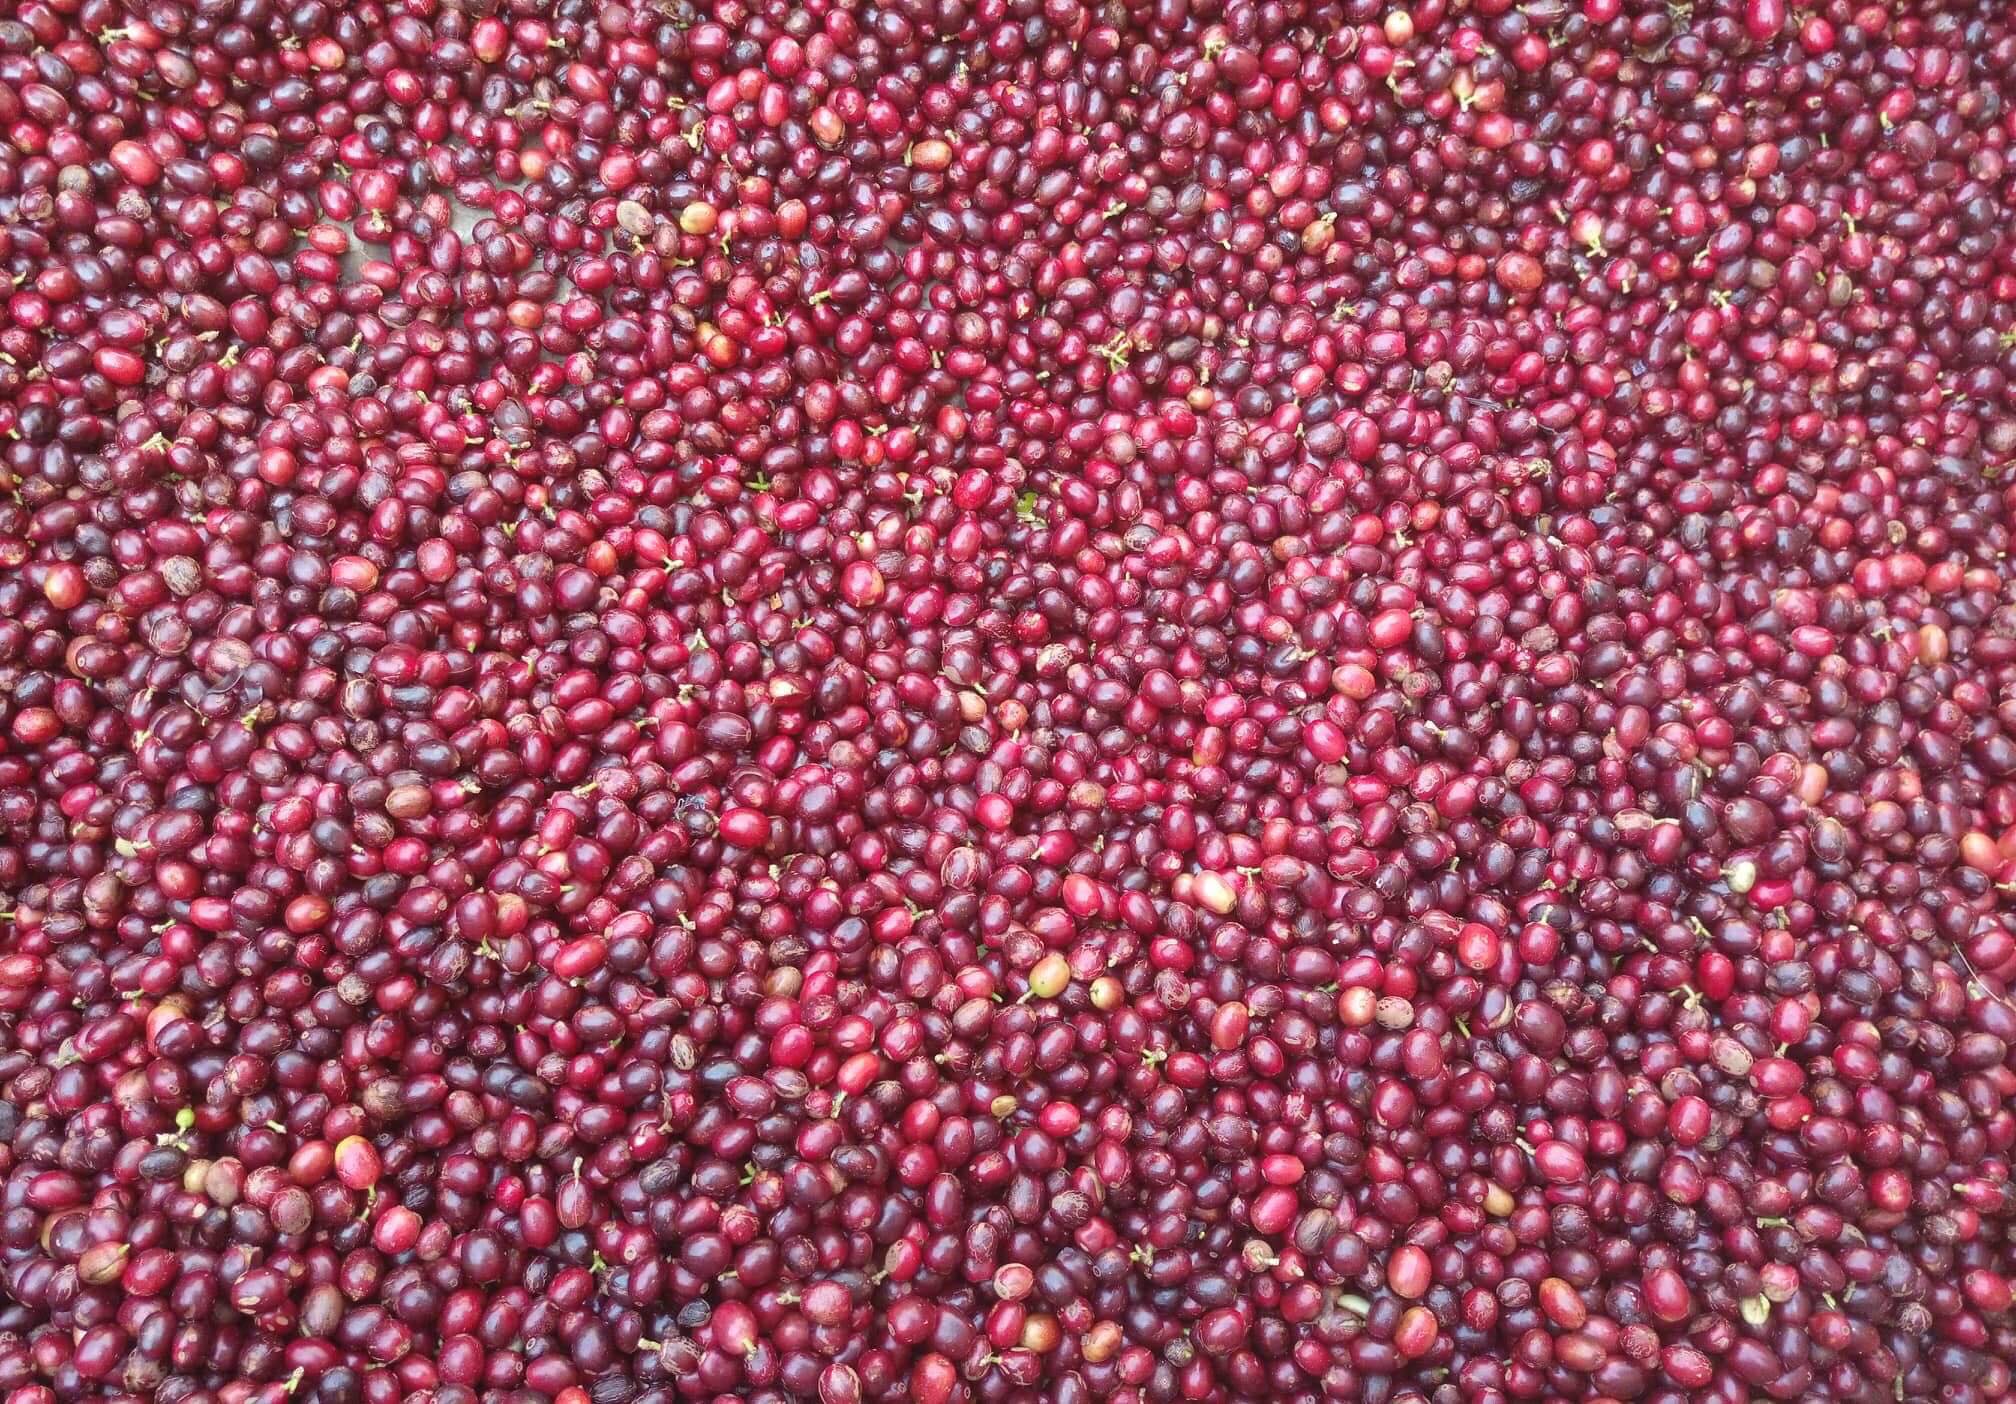 To make a cup of natural sweet coffee harvesting must be done when the fruit is ripe enough as the amount of sugar in the coffee fruit reaches maximum during the growing period.
Control the drying to ensure coffee beans are not moldy